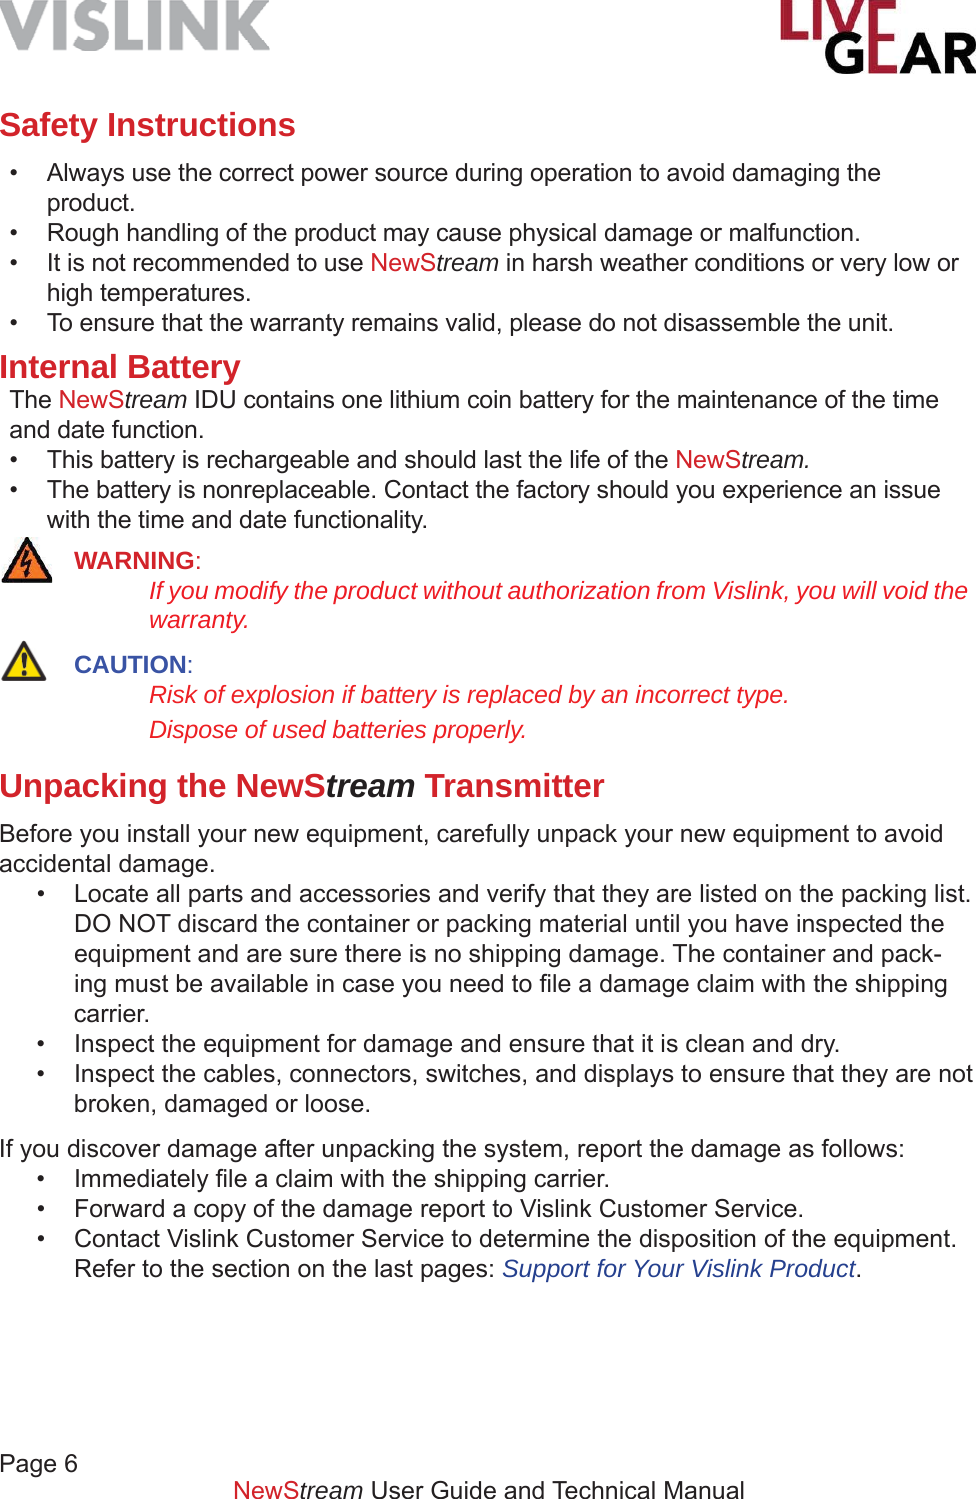 Page 6         NewStream User Guide and Technical ManualSafety Instructions•  Always use the correct power source during operation to avoid damaging the product.•  Rough handling of the product may cause physical damage or malfunction.•  It is not recommended to use NewStream in harsh weather conditions or very low or high temperatures.•  To ensure that the warranty remains valid, please do not disassemble the unit. Internal BatteryThe NewStream IDU contains one lithium coin battery for the maintenance of the time and date function.•  This battery is rechargeable and should last the life of the NewStream.•  The battery is nonreplaceable. Contact the factory should you experience an issue with the time and date functionality. WARNING:   If you modify the product without authorization from Vislink, you will void the    warranty. CAUTION:   Risk of explosion if battery is replaced by an incorrect type.    Dispose of used batteries properly.Unpacking the NewStream Transmitter Before you install your new equipment, carefully unpack your new equipment to avoid accidental damage.•  Locate all parts and accessories and verify that they are listed on the packing list. DO NOT discard the container or packing material until you have inspected the equipment and are sure there is no shipping damage. The container and pack-ing must be available in case you need to ﬁ le a damage claim with the shipping carrier.•  Inspect the equipment for damage and ensure that it is clean and dry.•  Inspect the cables, connectors, switches, and displays to ensure that they are not broken, damaged or loose.If you discover damage after unpacking the system, report the damage as follows:• Immediately ﬁ le a claim with the shipping carrier.•  Forward a copy of the damage report to Vislink Customer Service.•  Contact Vislink Customer Service to determine the disposition of the equipment. Refer to the section on the last pages: Support for Your Vislink Product.